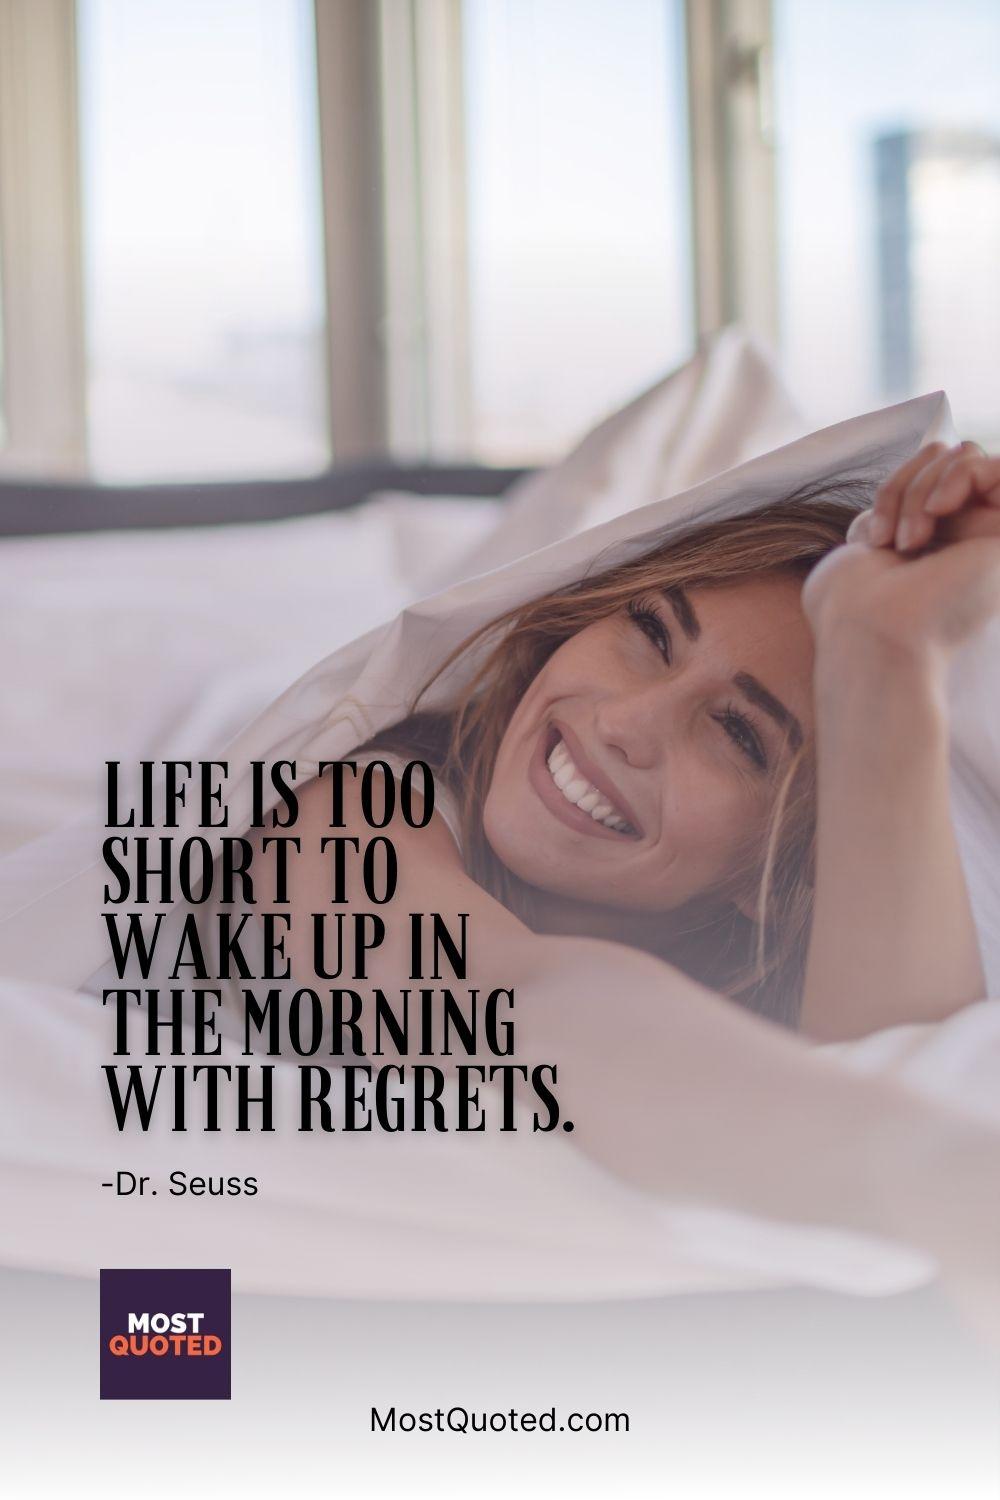 Life is too short to wake up in the morning with regrets. - Dr. Seuss